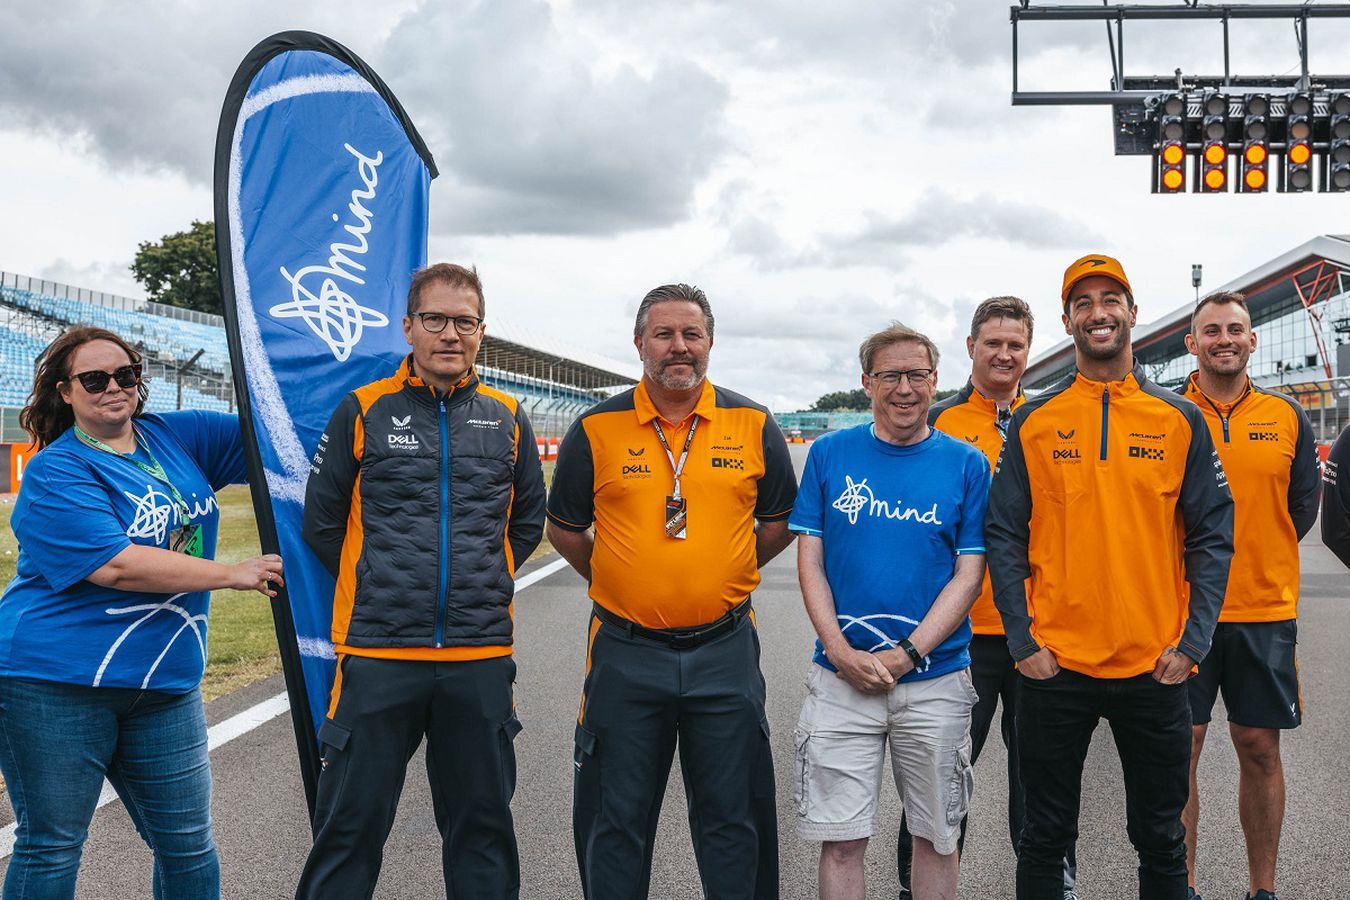 'One Lap for Mind' was a fundraising challenge held at the British Grand Prix